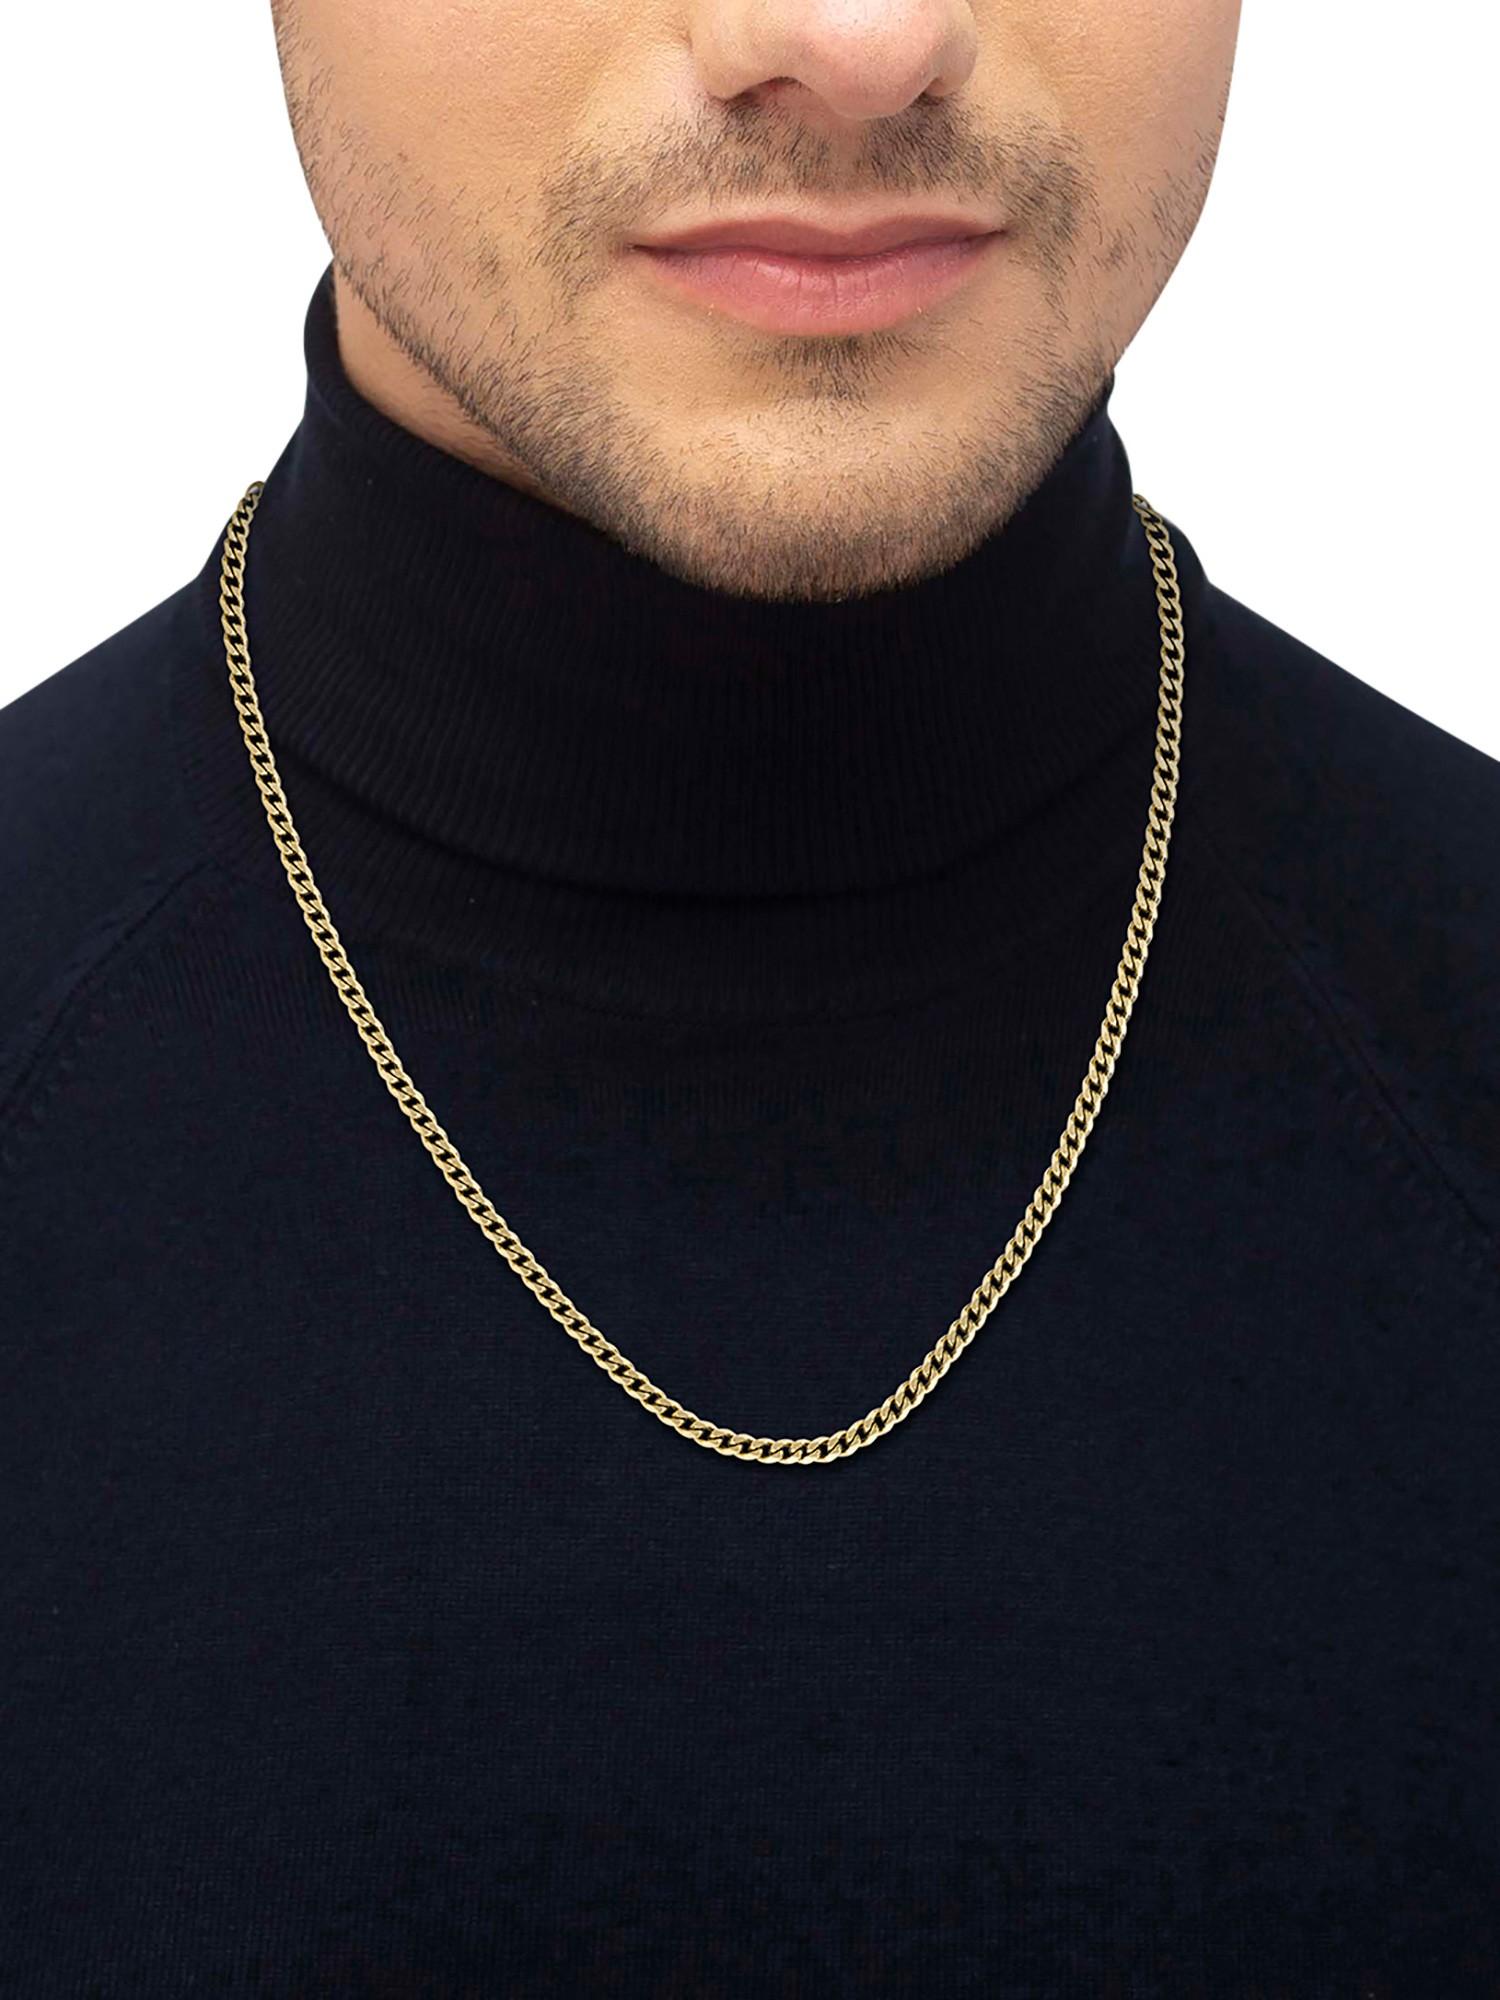 BOSS - Chain necklace in black and gold tones